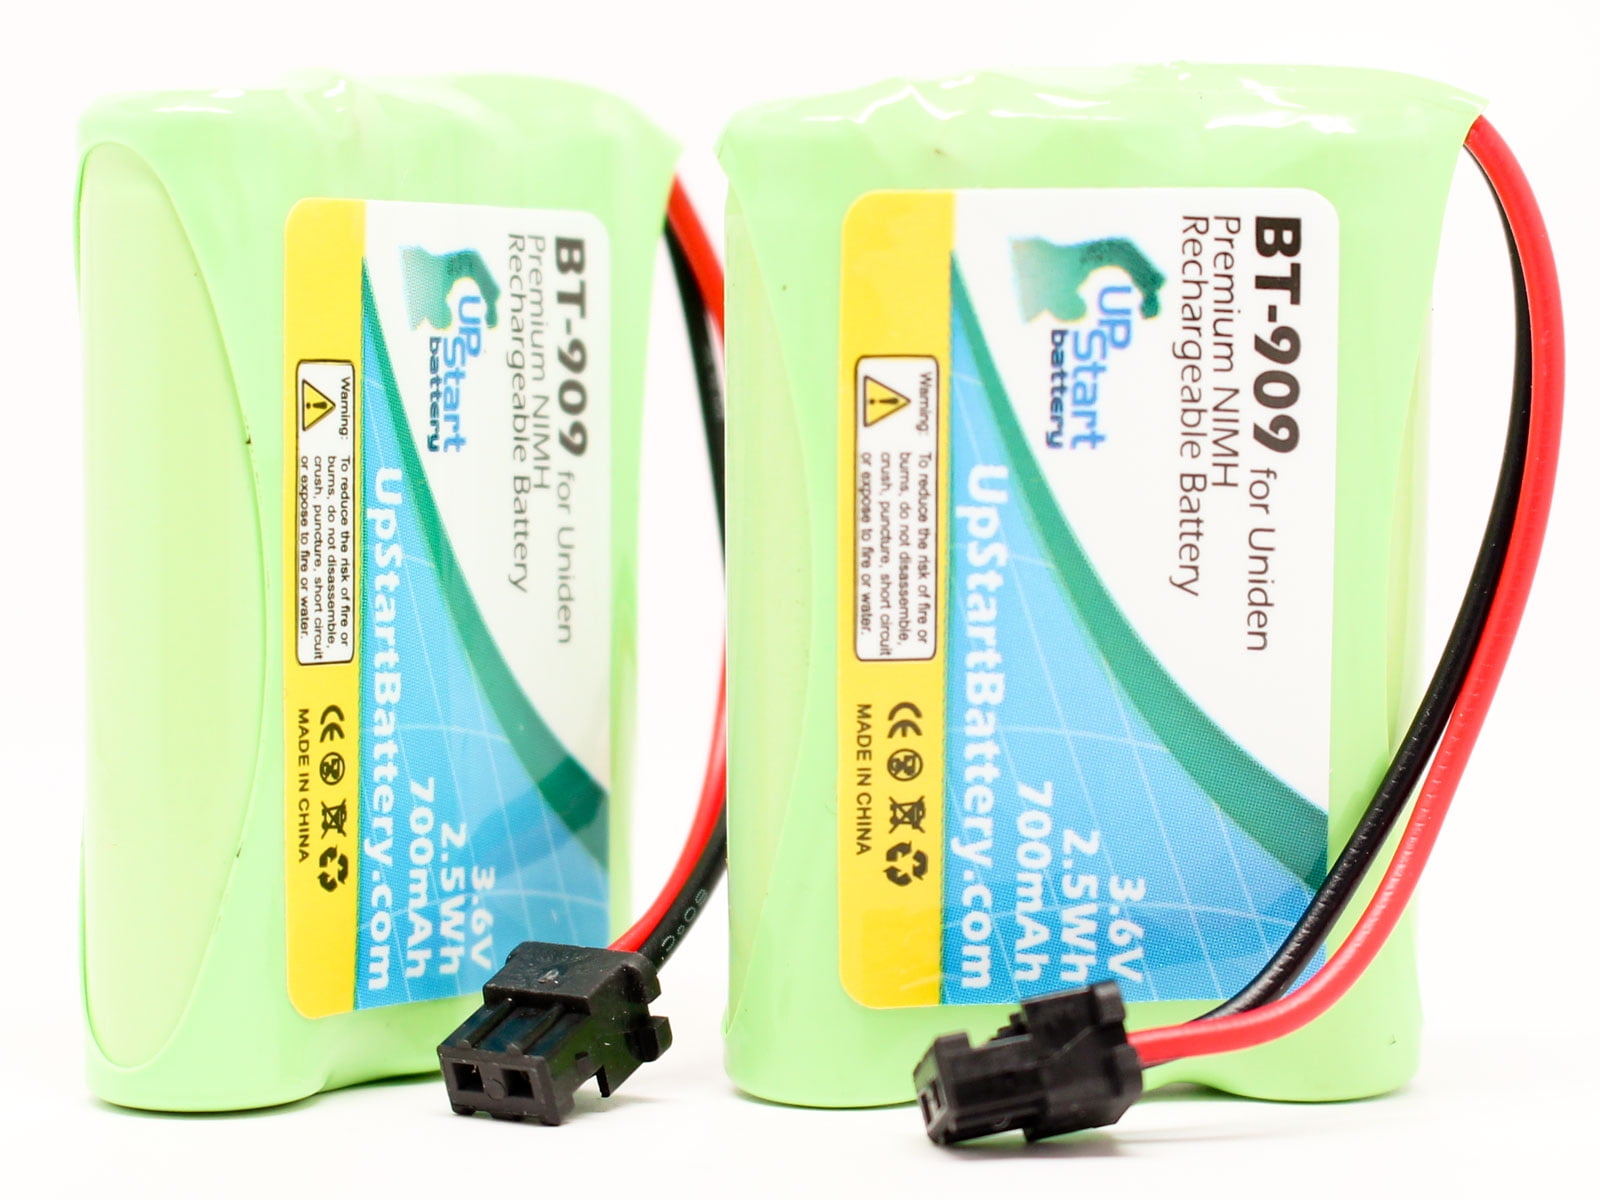 2 Pack Replacement for Uniden BT909 Battery 700mAh 3.6V NI-MH Compatible with Uniden Cordless Phone Battery